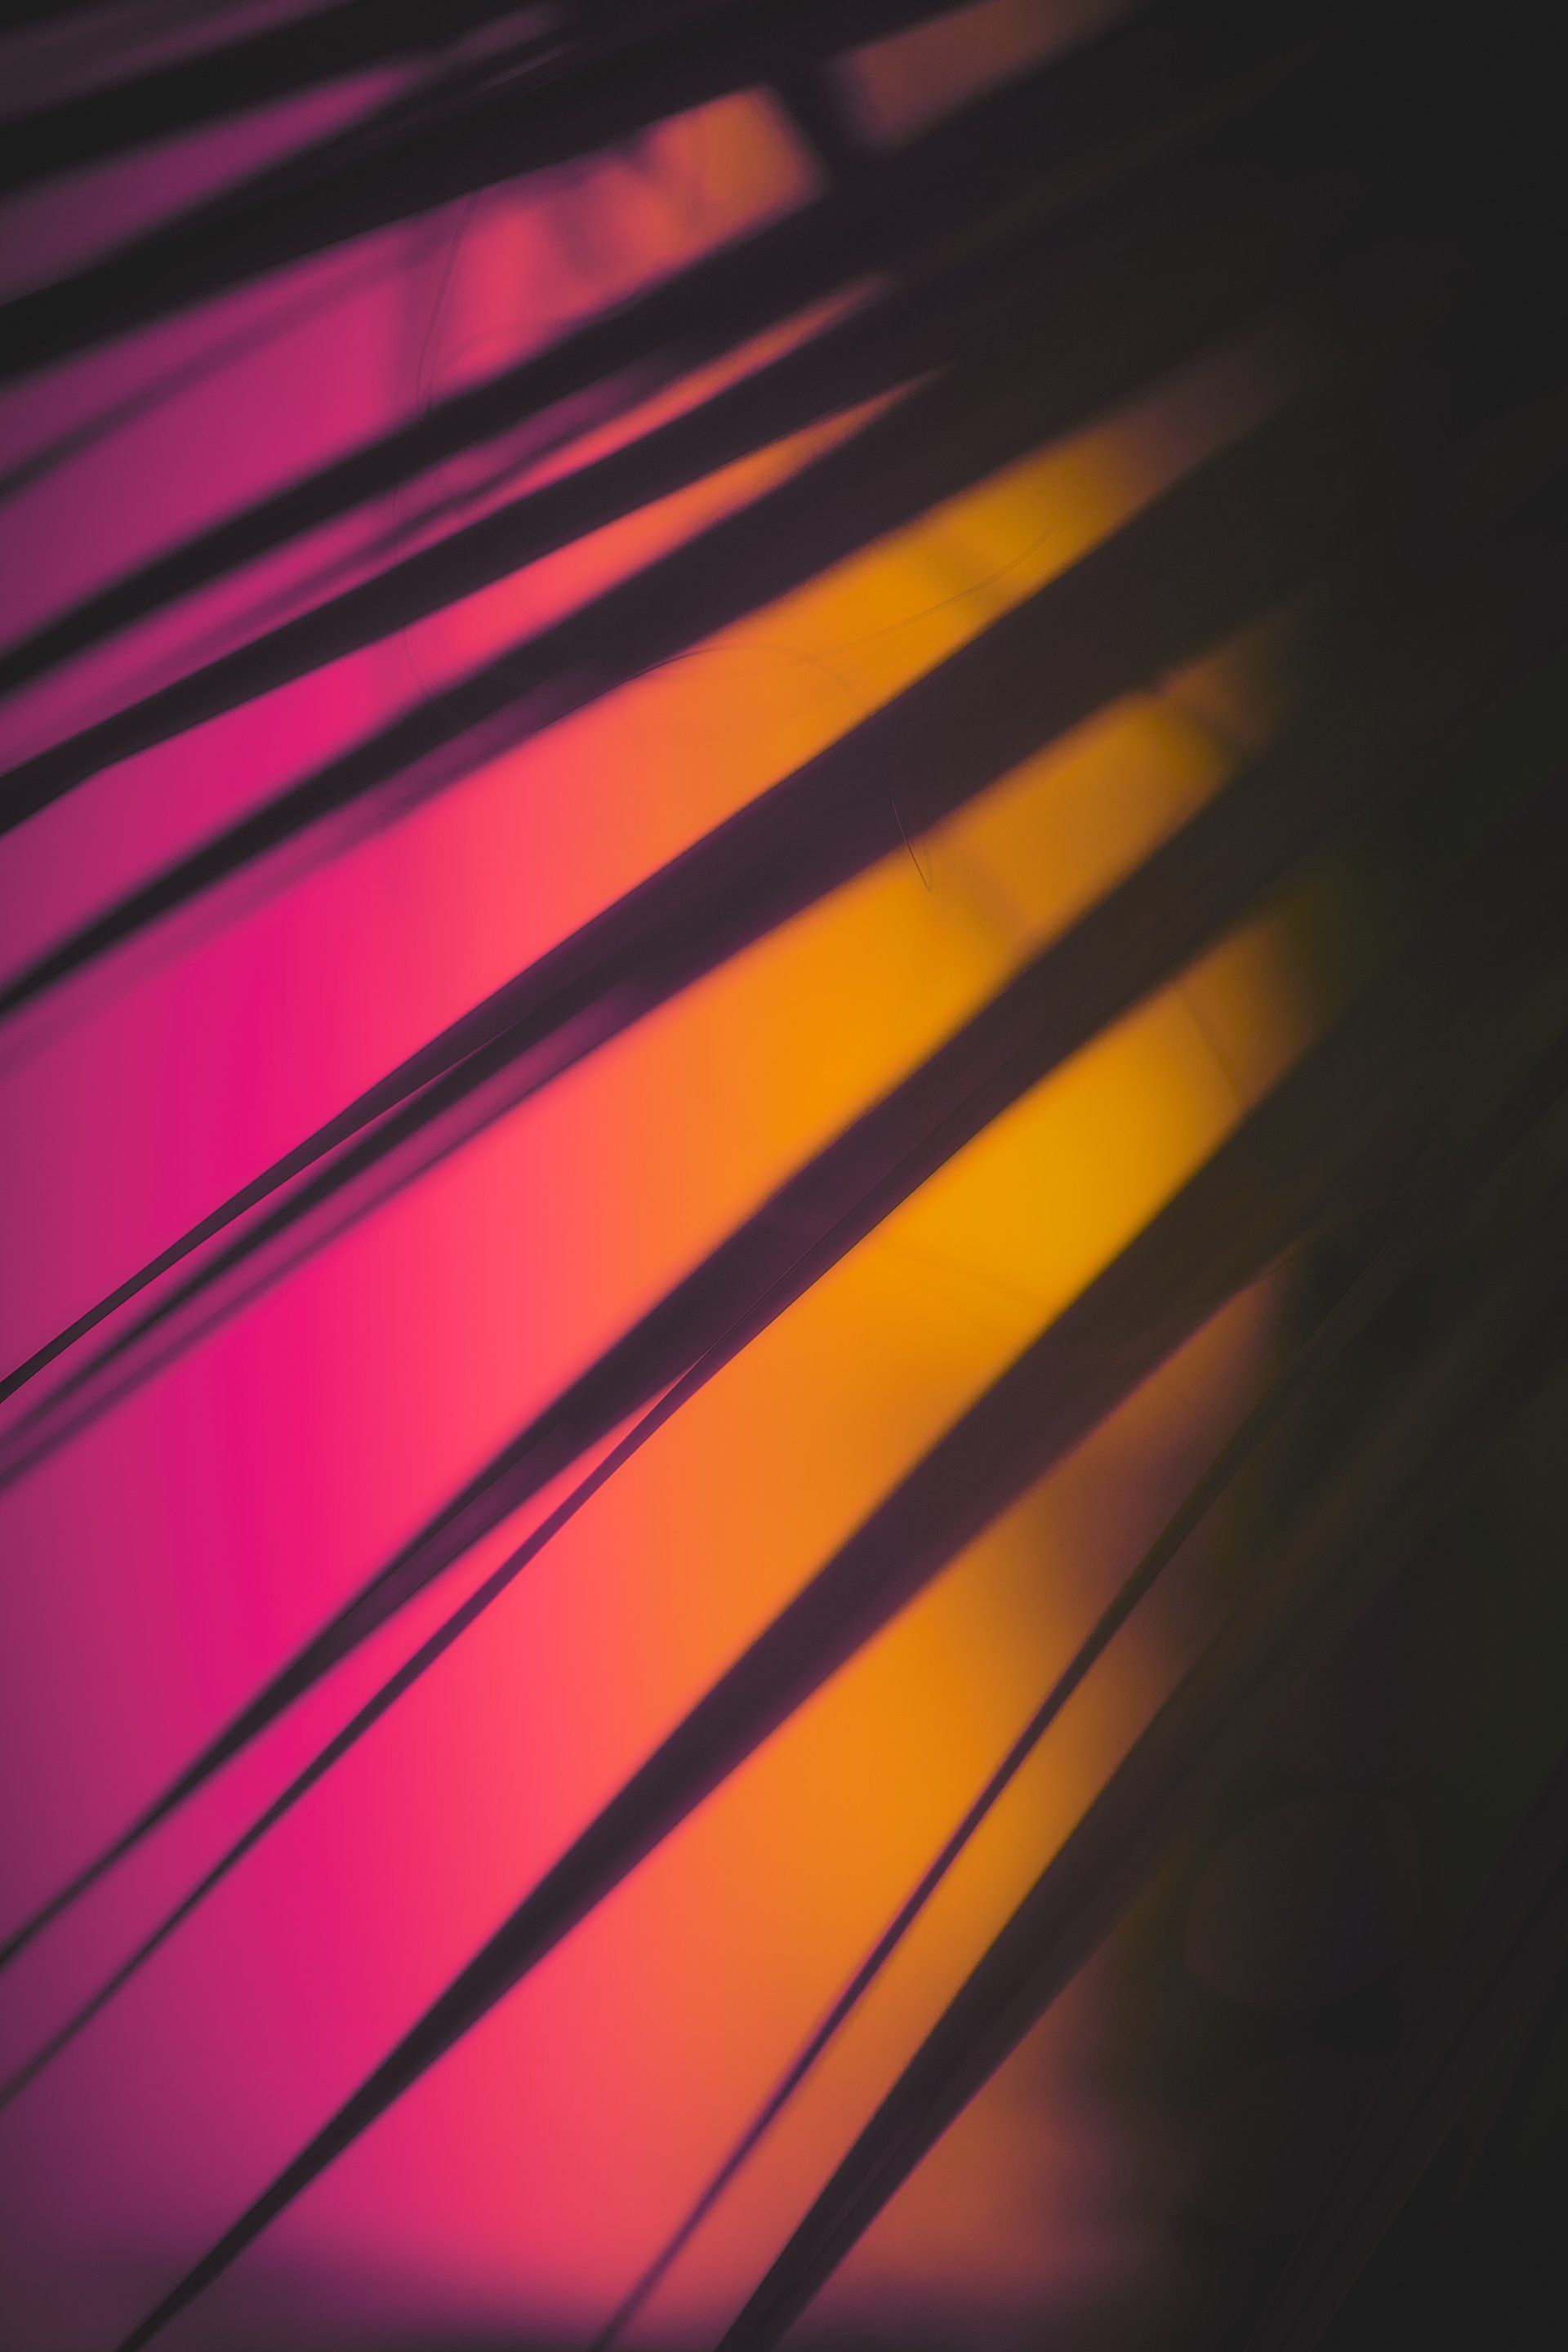 Abstract neon image with pink and yellow with finger-like shadows